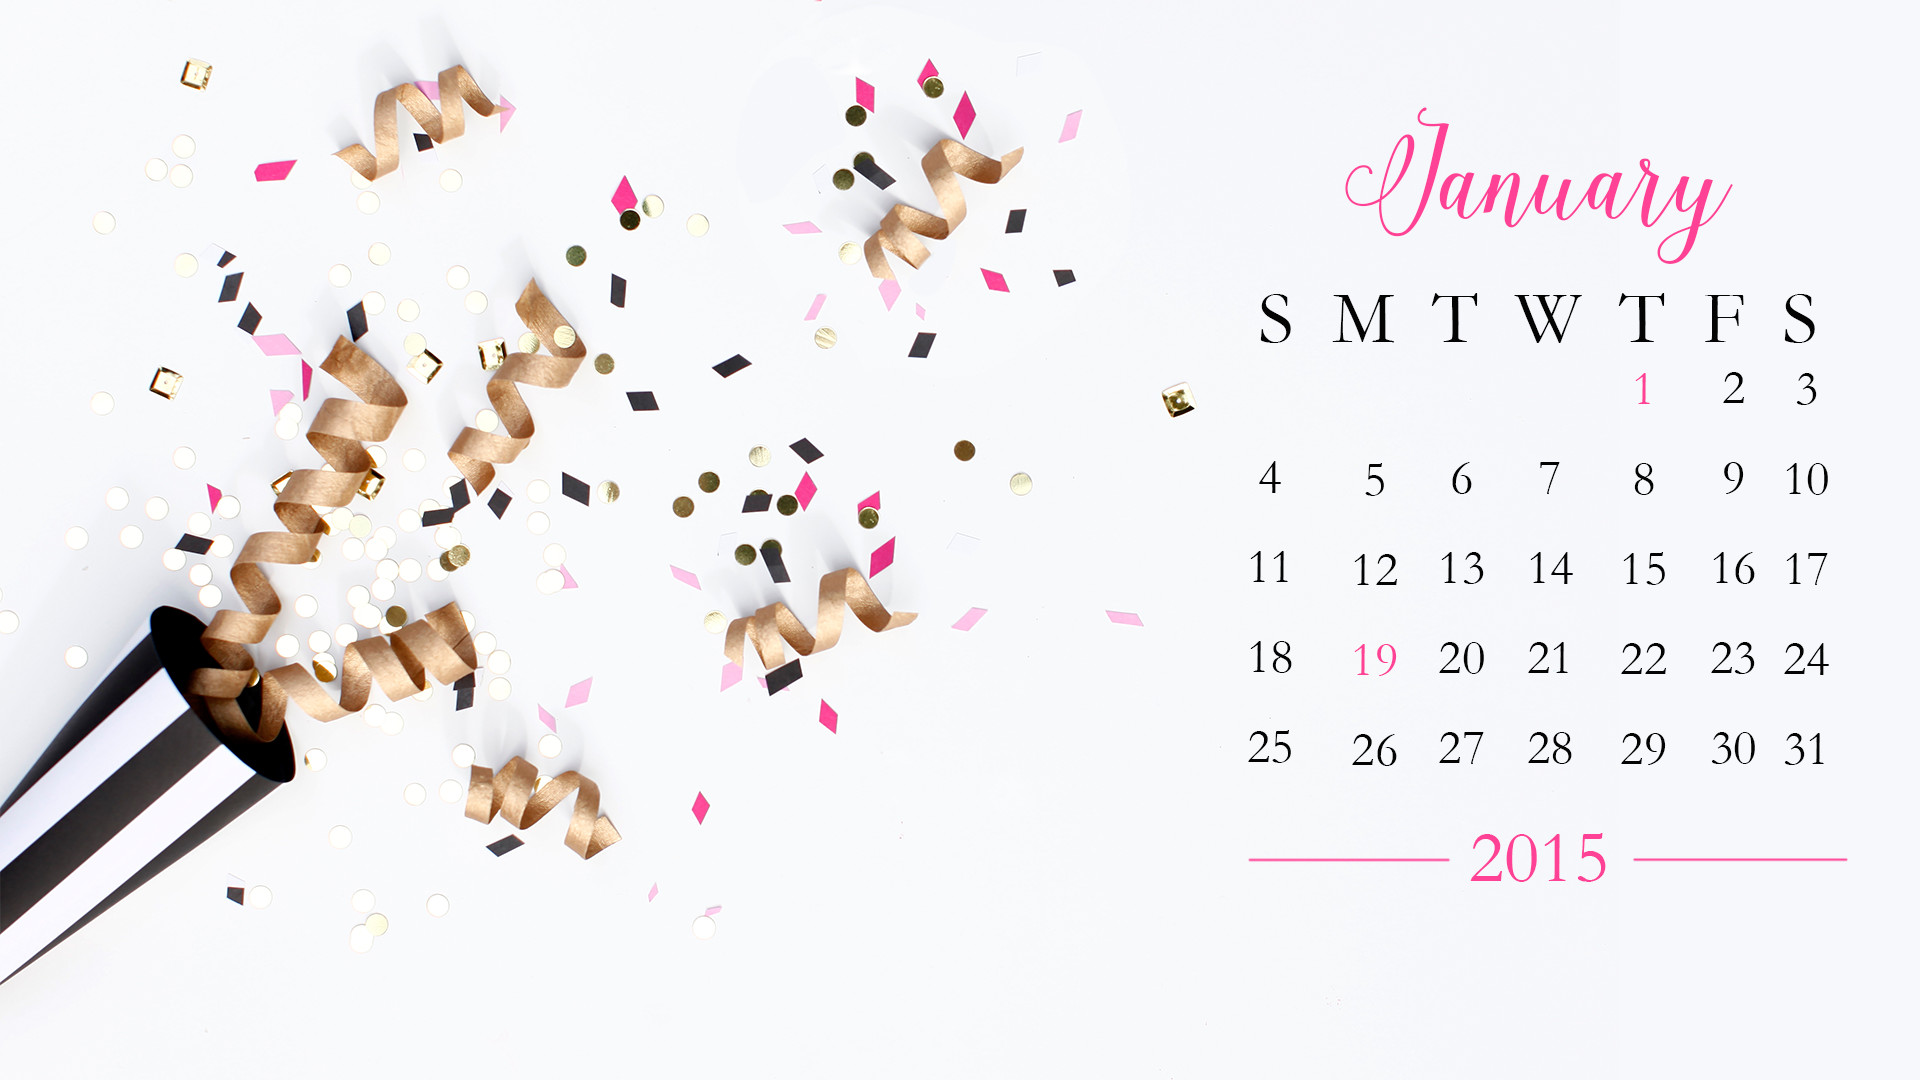 Collection Kate Spade Food Wallpaper Motivational Wallpapers 04 Rabbit Food For My Bunny Teeth 1920x1080